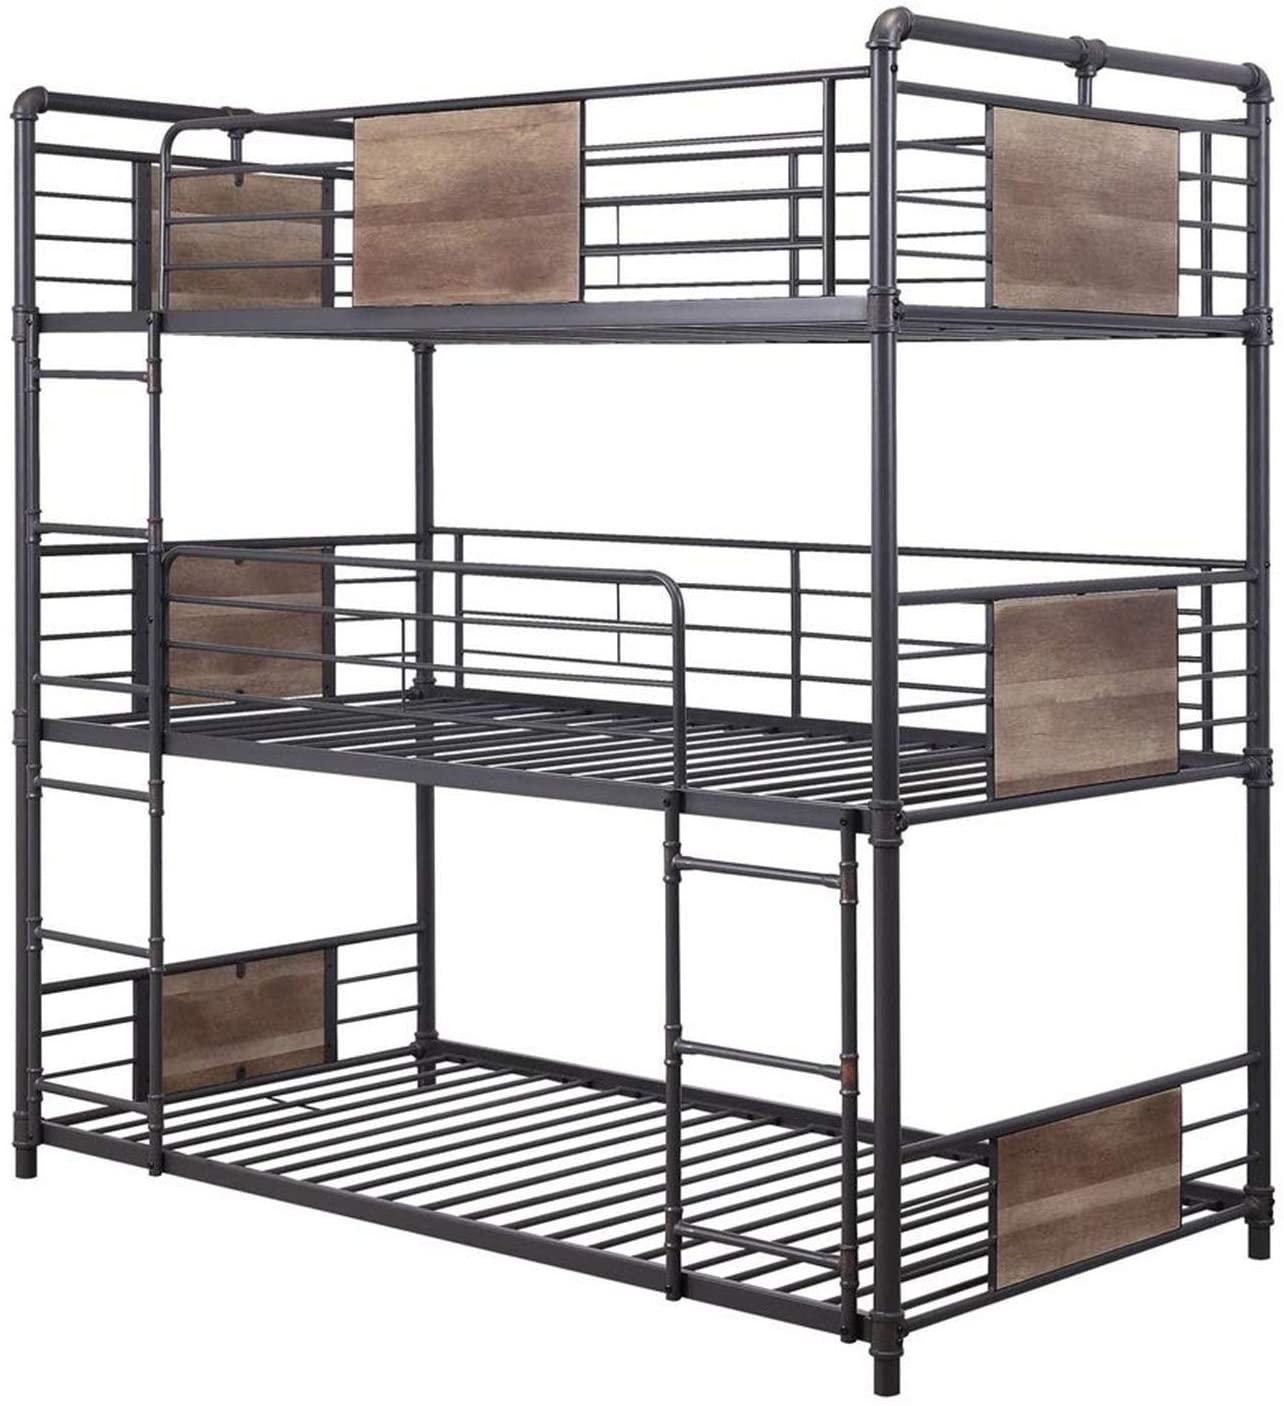 Contemporary, Rustic T/t/t triple bunk bed Brantley 37820 in Sand 